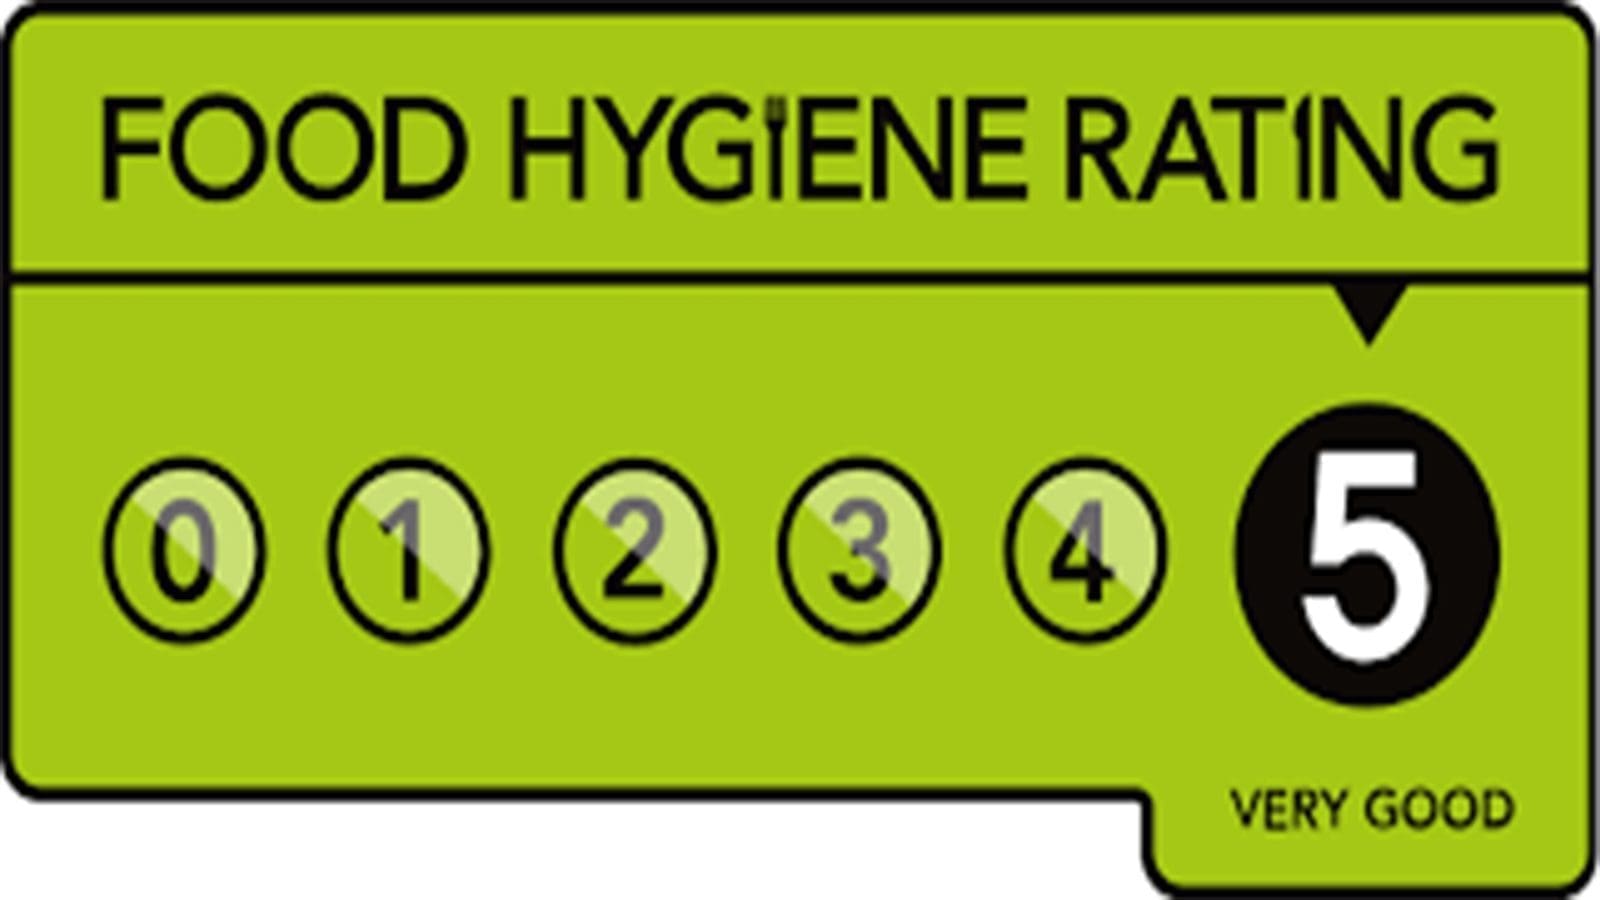 UK consumers acknowledge significance of national Food Hygiene Rating Scheme